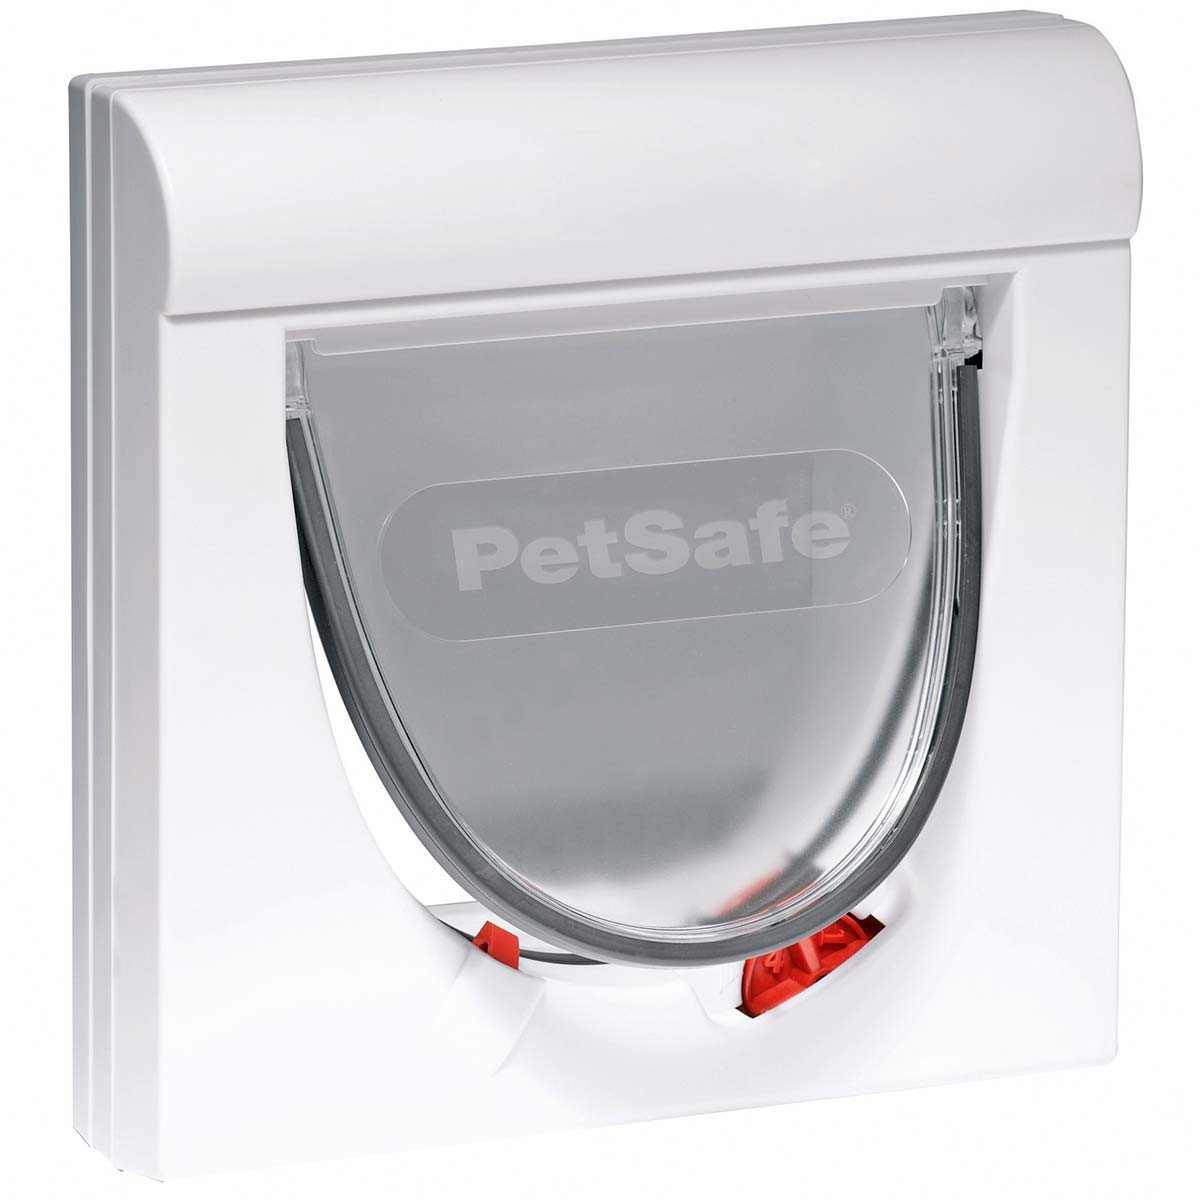 PetSafe chatière magnétique staywell 932